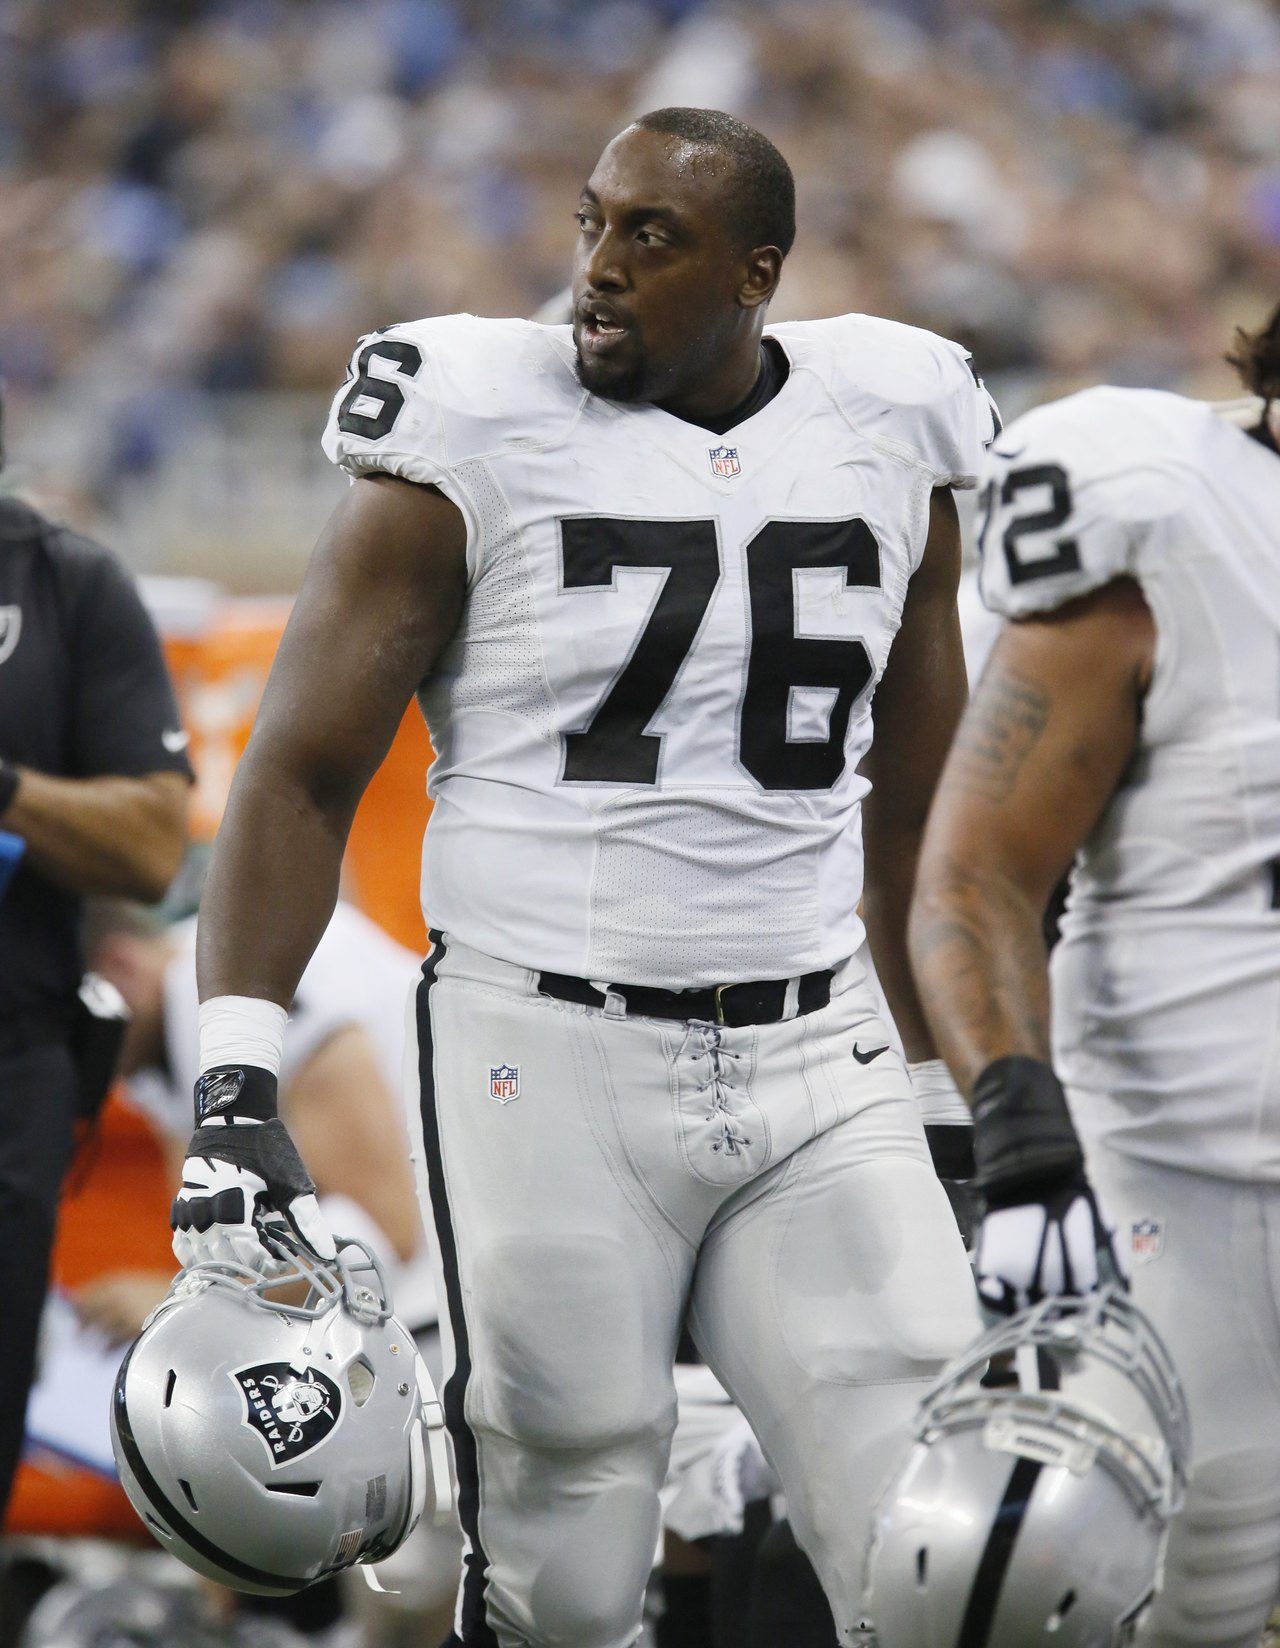 Oakland Raiders offensive guard J’Marcus Webb (76) walks back to the bench during the first half of an NFL football game against the Detroit Lions, Sunday, Nov. 22, 2015, in Detroit. (AP Photo/Duane Burleson)